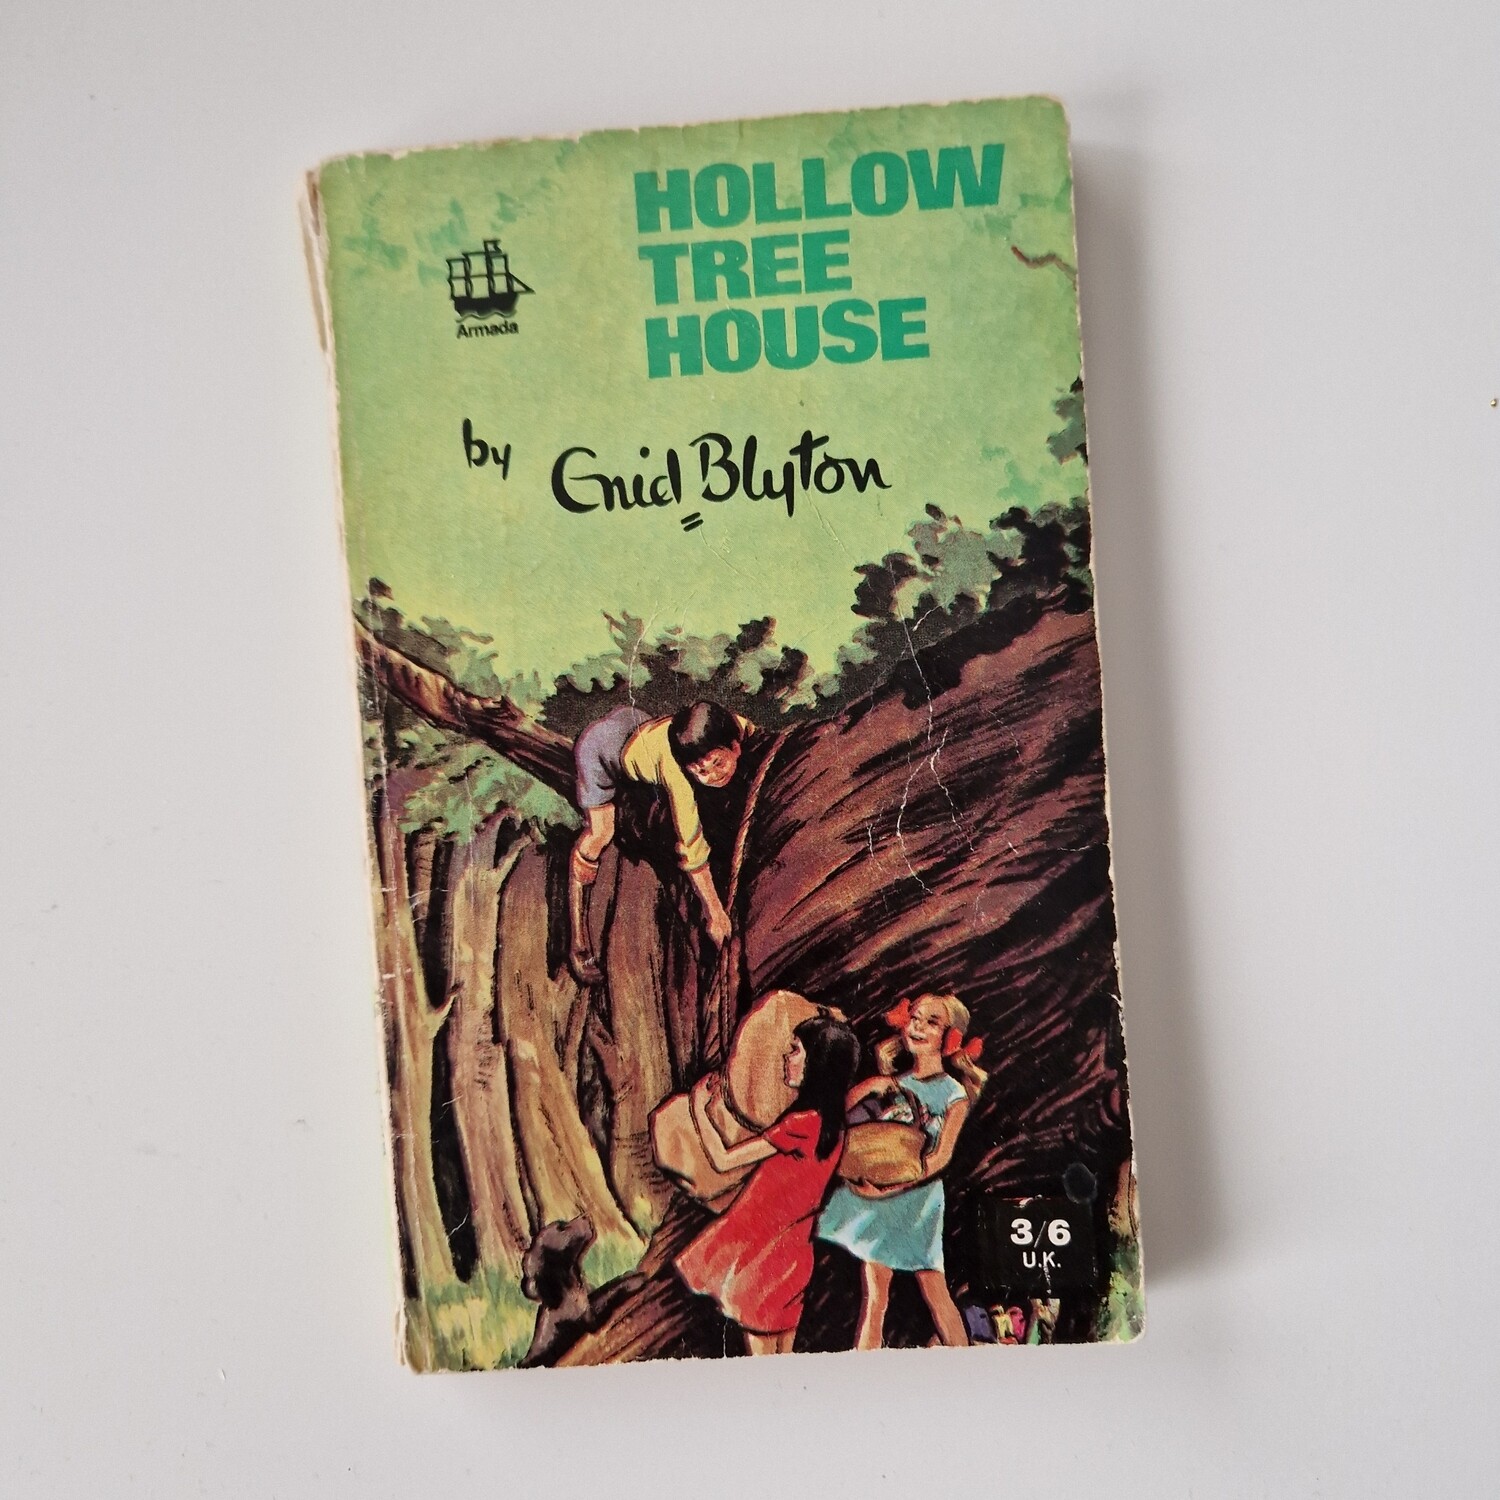 Enid Blyton Hollow Tree House, 1966 Notebook - made from a paperback book